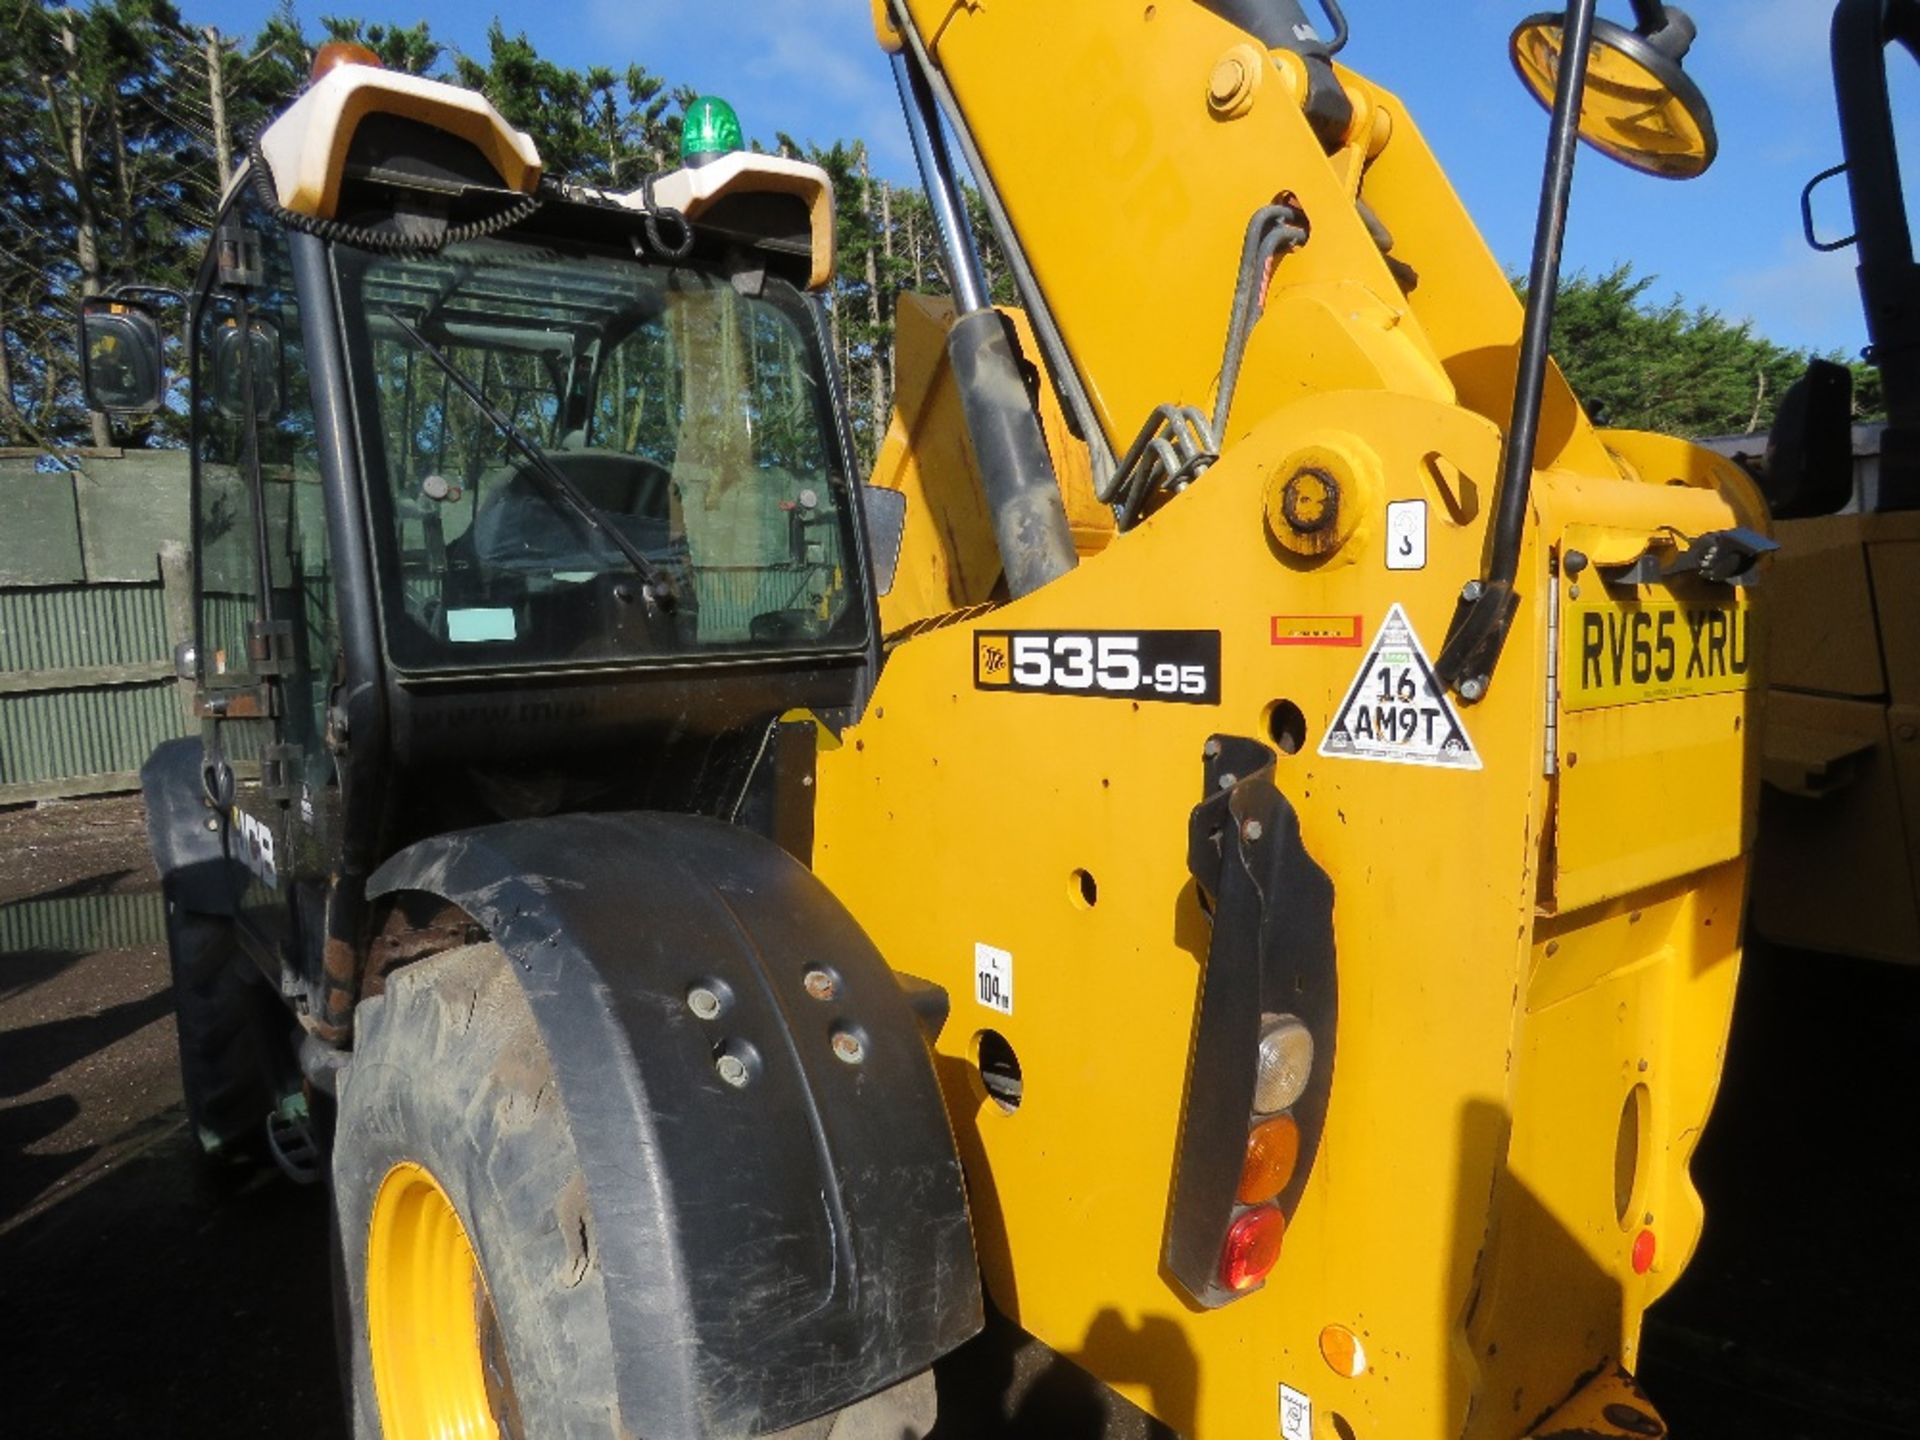 JCB 535-95 TELEHANDLER, YEAR 2015 REG: RV65 XRU. V5 TO FOLLOW ONCE SOLD. OWNED BY VENDOR FROM NEW. - Image 2 of 10